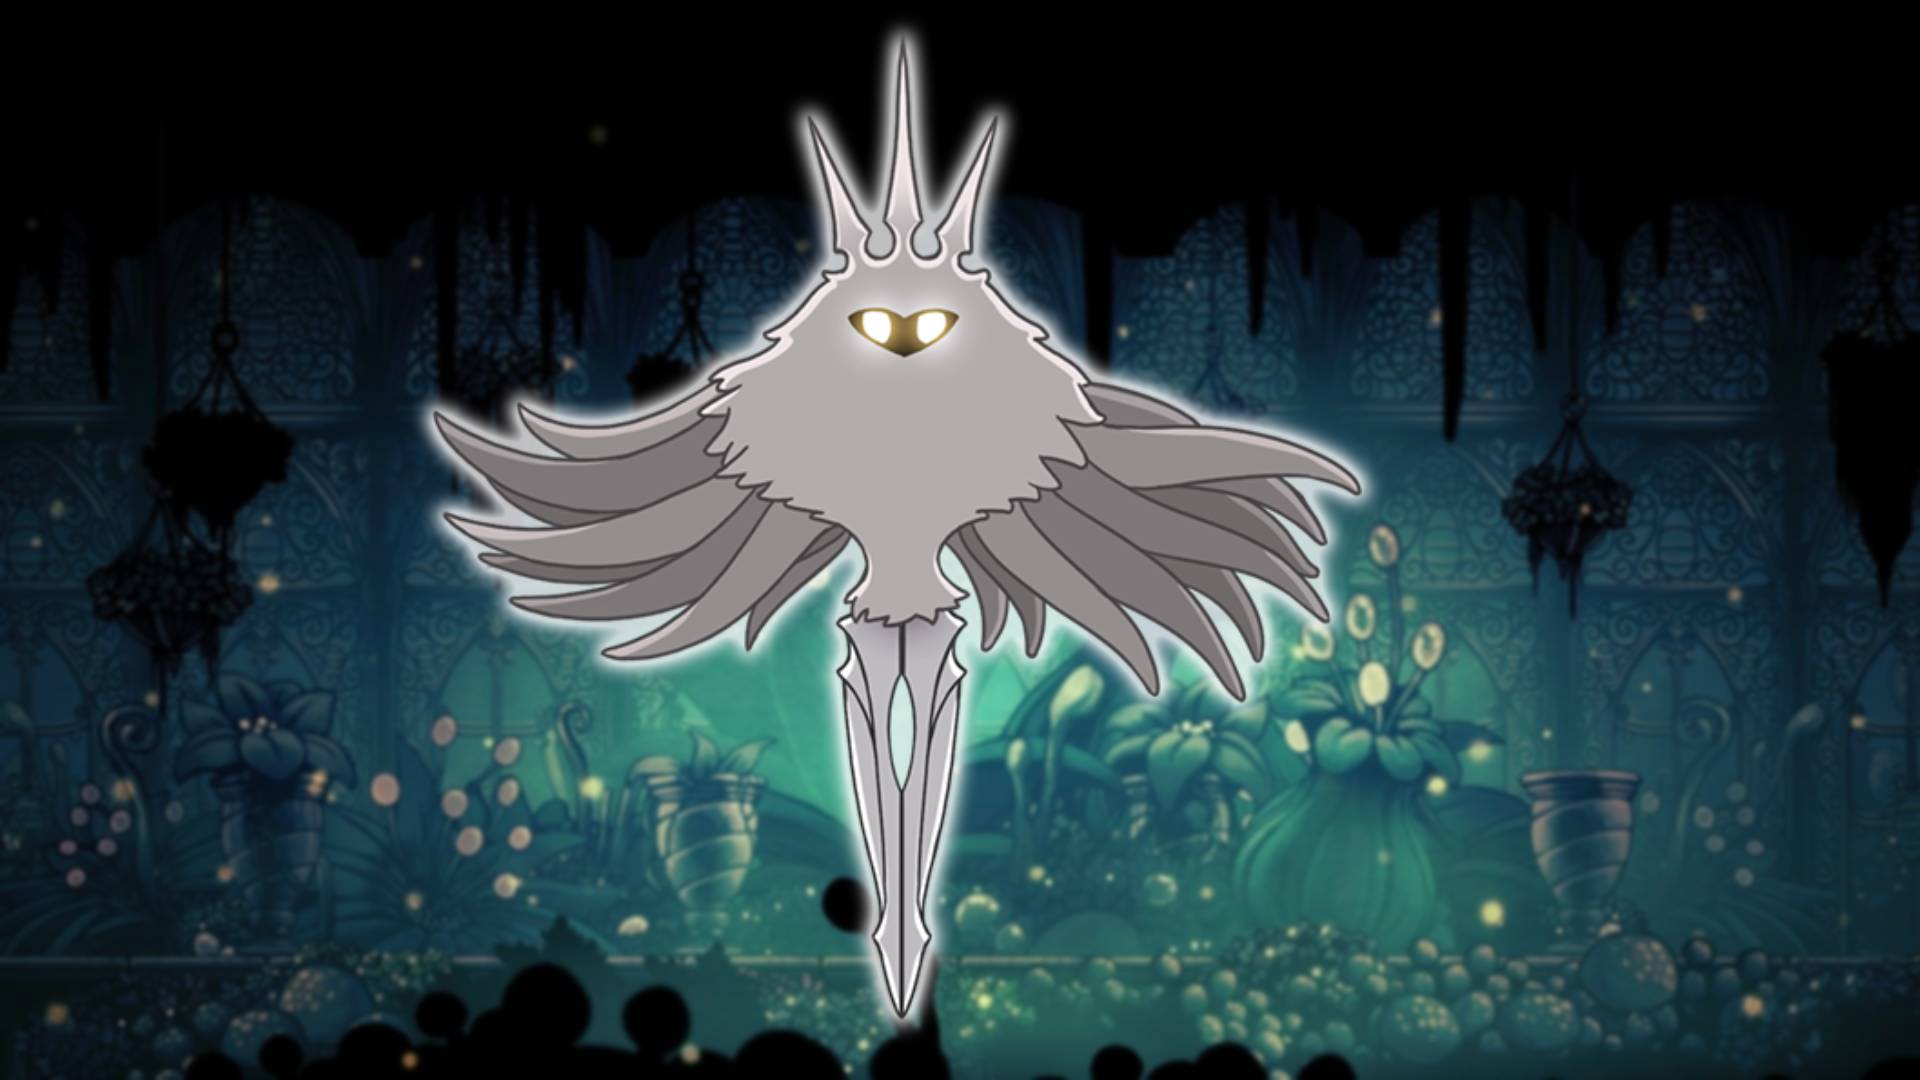 The Radiance - the Hollow Knight boss, is visible against a mossy green background area from Hollow Knight 